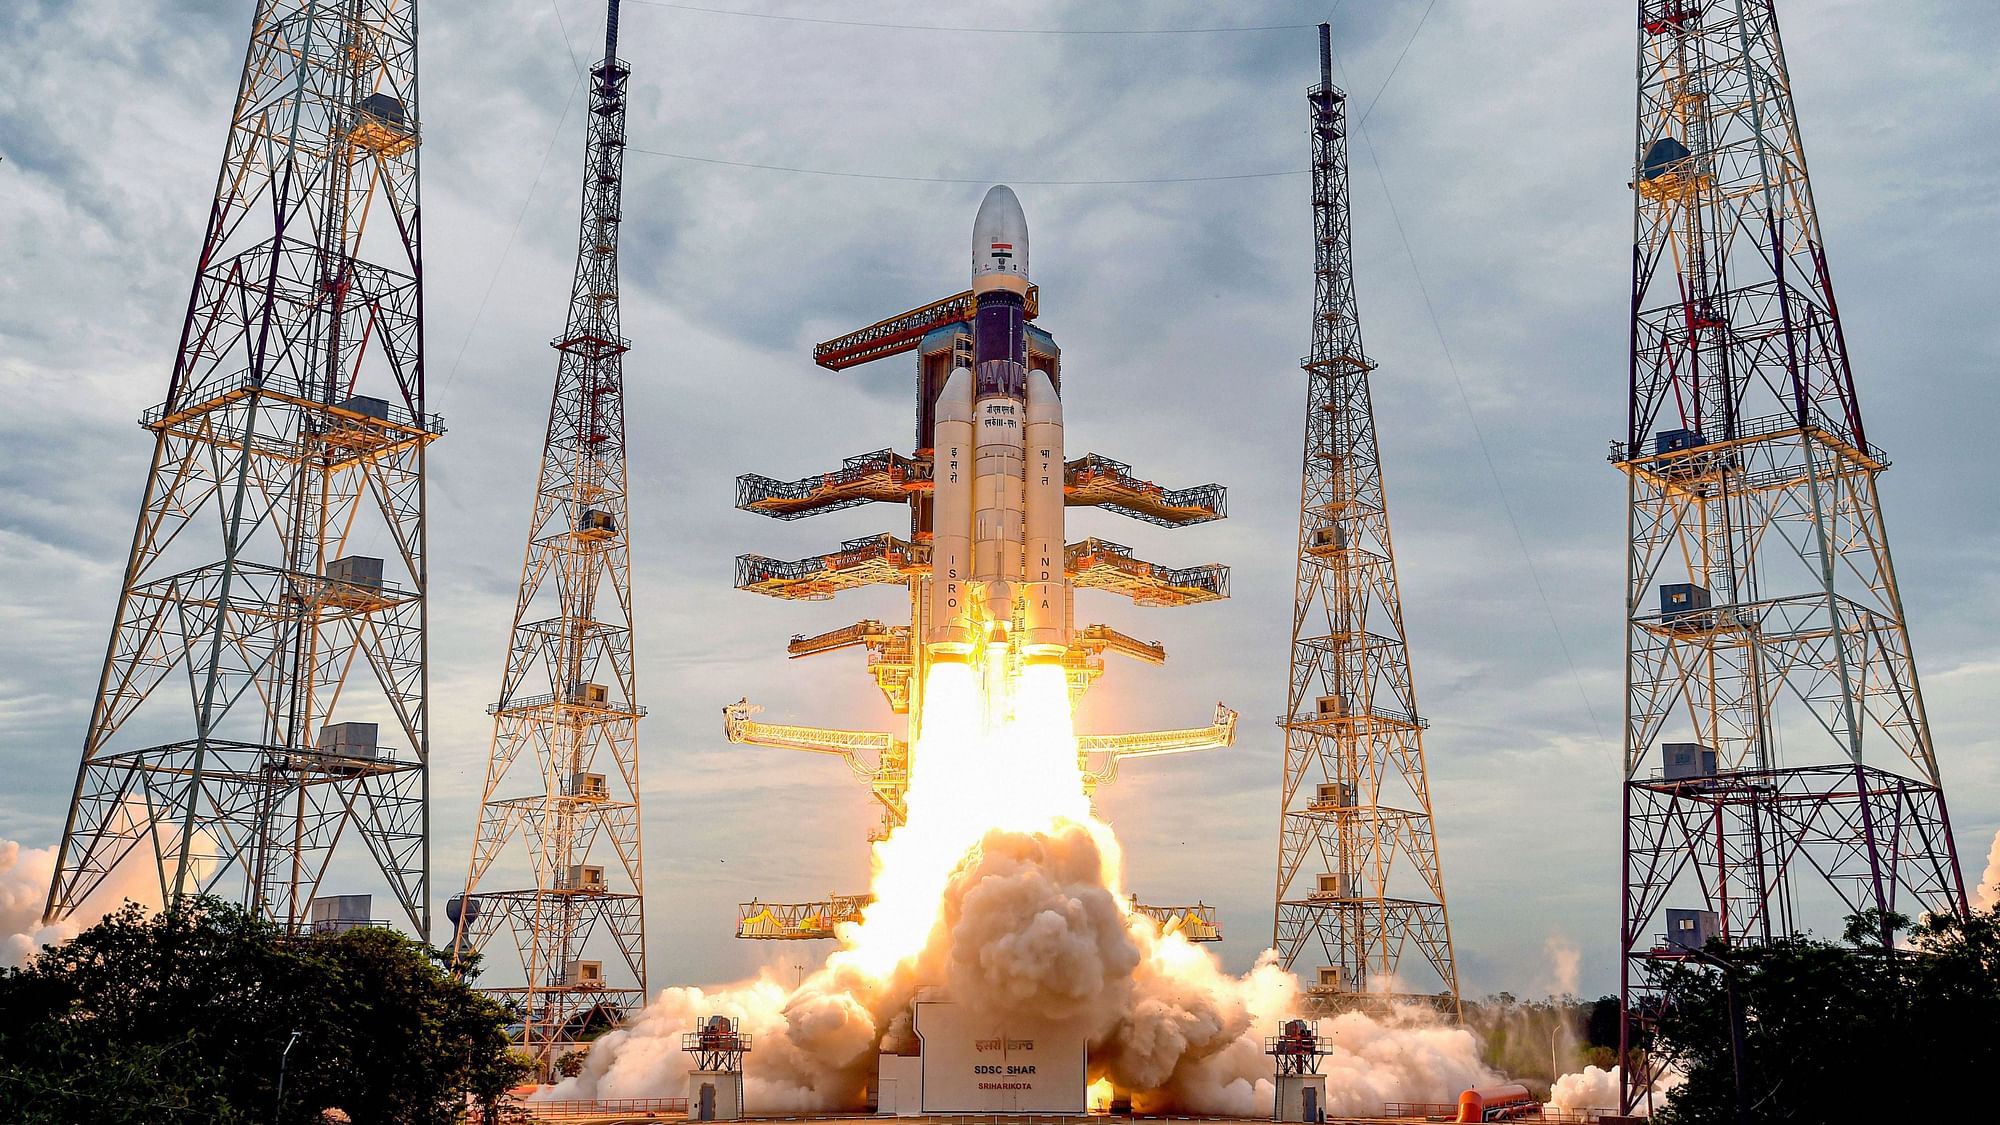 Aiming to take a “billion dreams” to the moon, India on Monday, successfully launched its second lunar mission, Chandrayaan-2